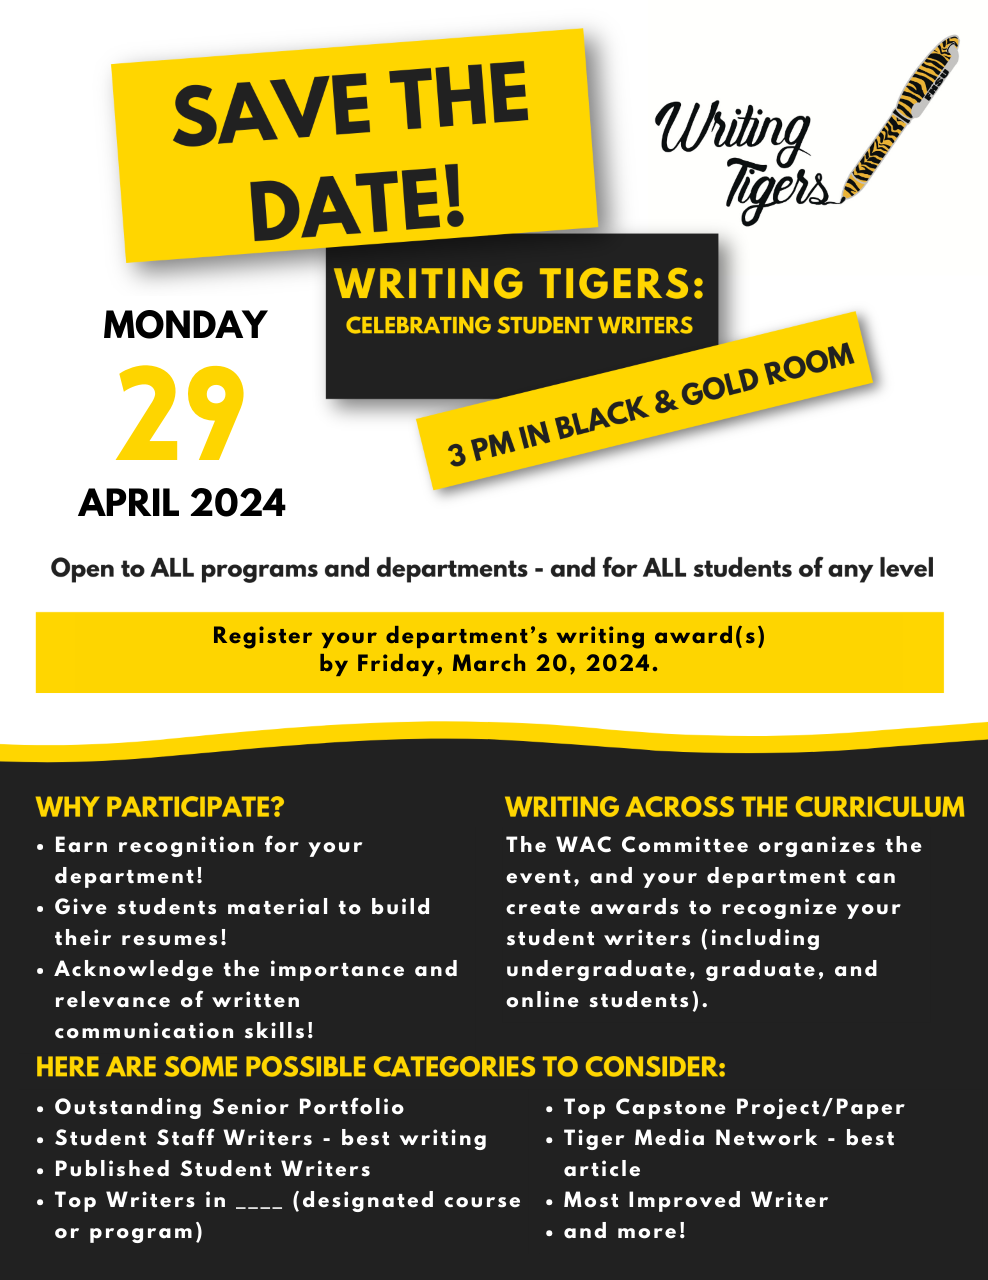 Writing Tigers Mon 4/29 at 3 in Black and Gold